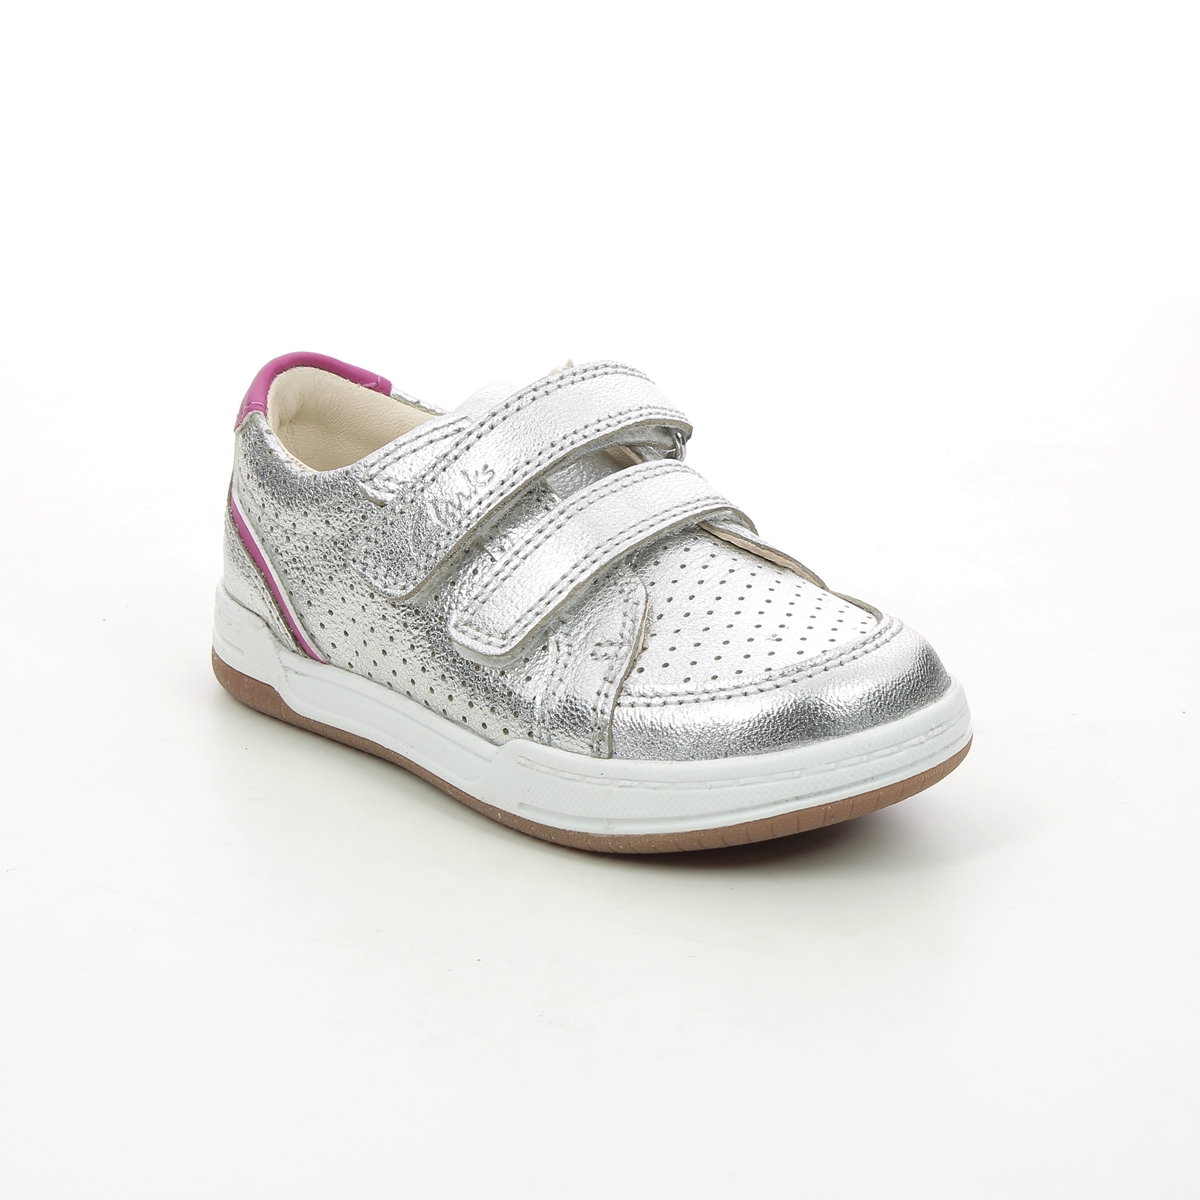 Clarks Fawn Solo T Silver Kids first shoes 6246-06F in a Plain Leather in Size 8